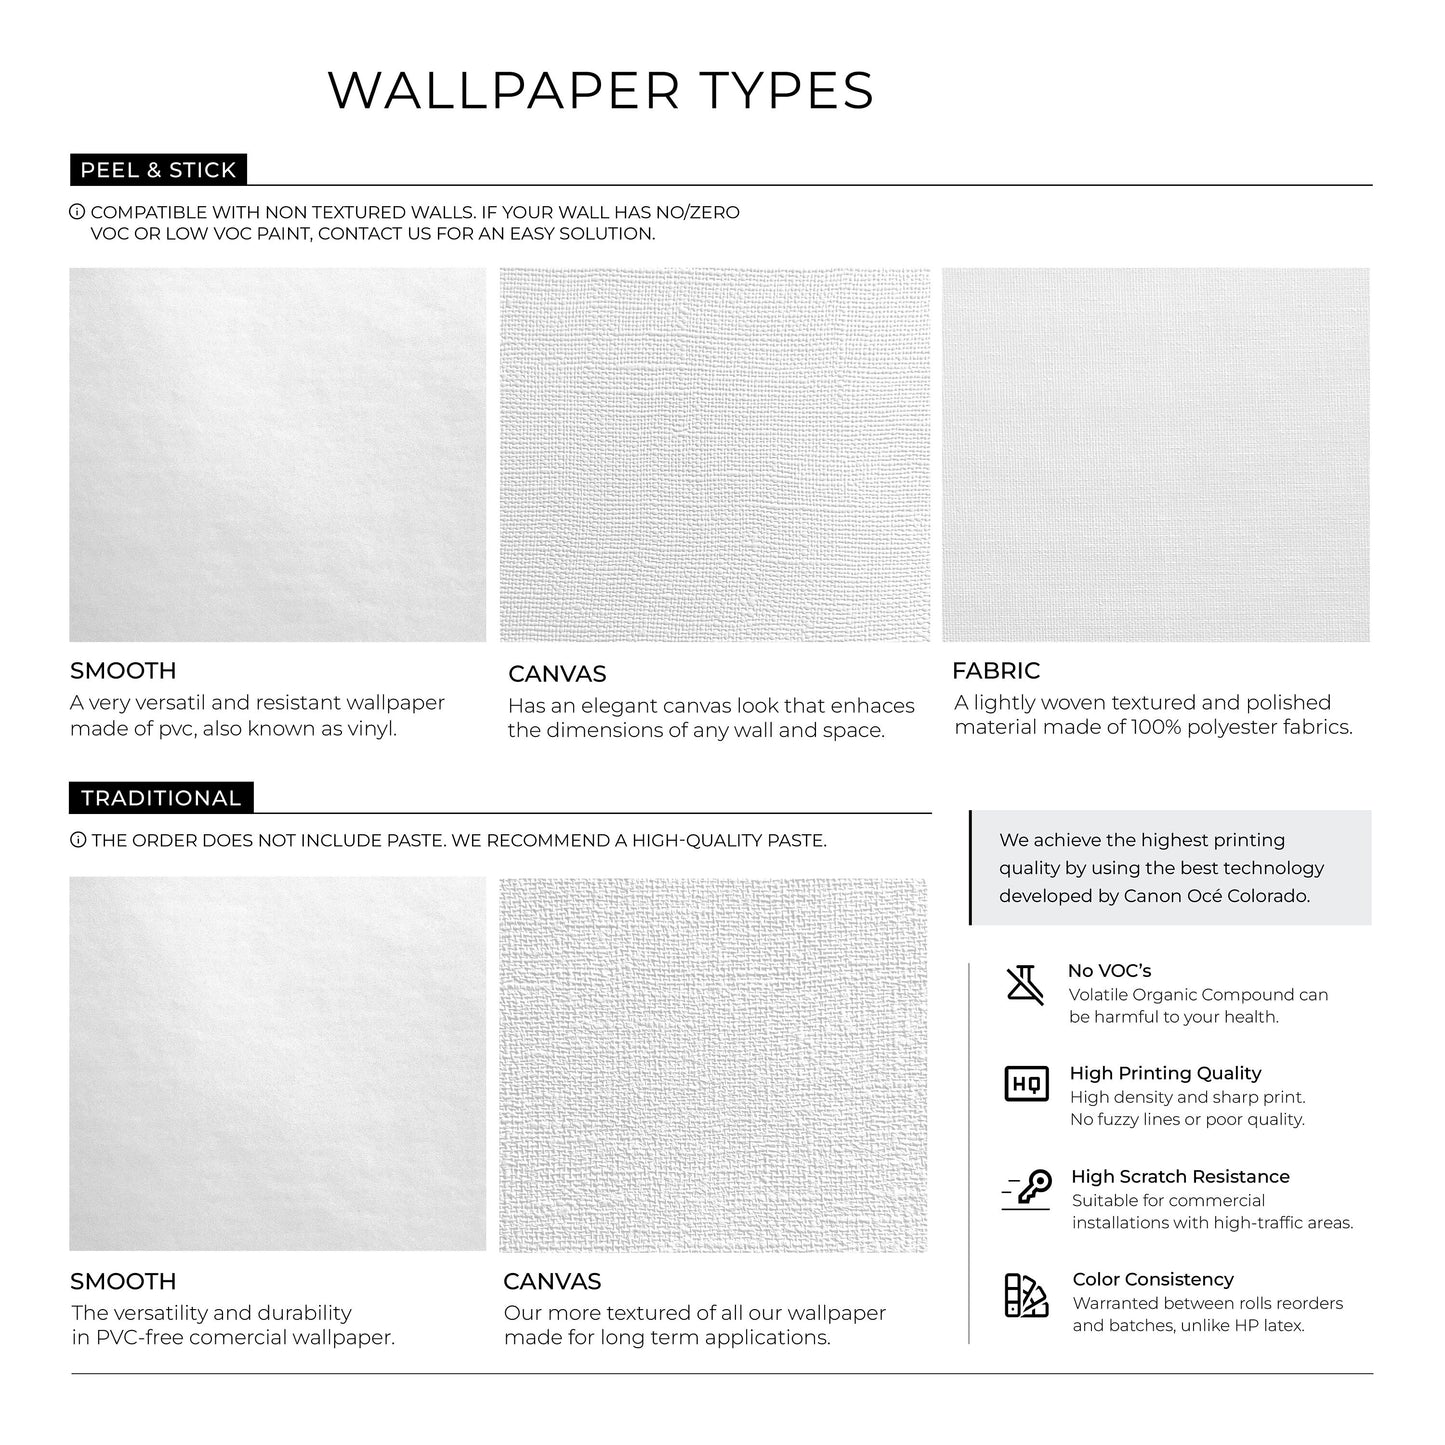 Black and White Peel and Stick Wallpaper Removable Wallpaper Wall Decor Home Decor Wall Decor Wall Prints Wall Hanging - B415